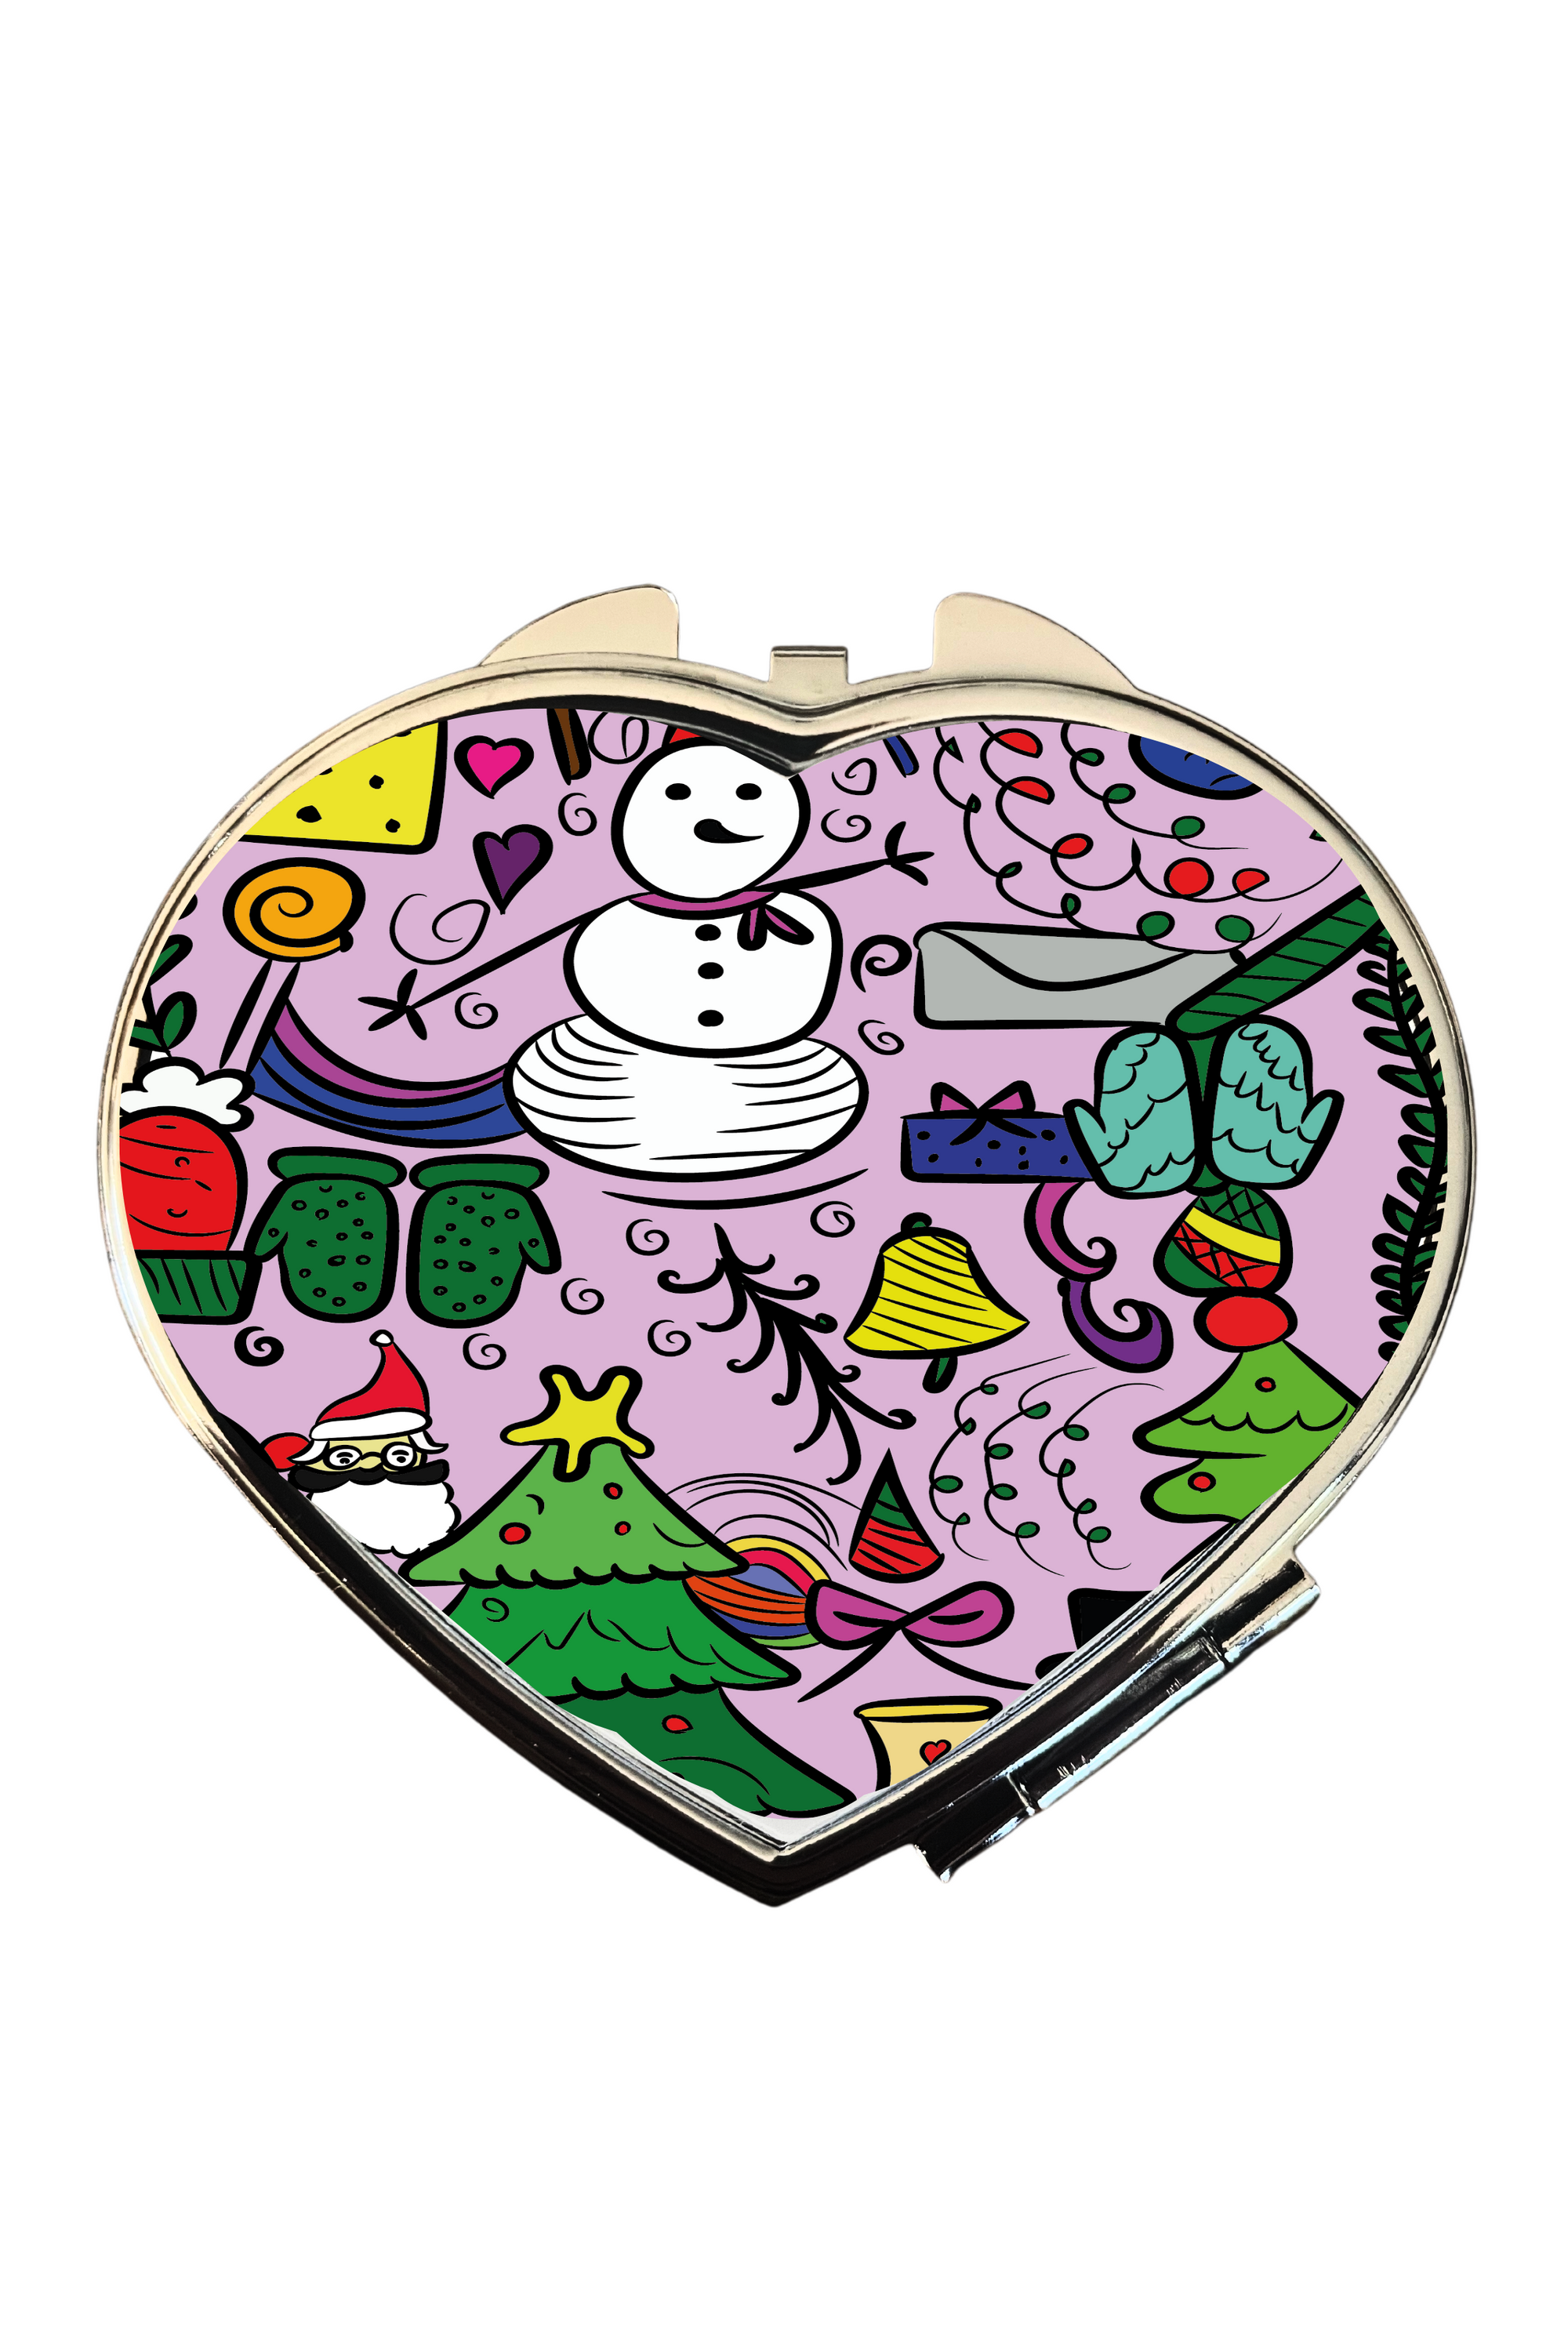 ***Colourful Christmas compact mirror